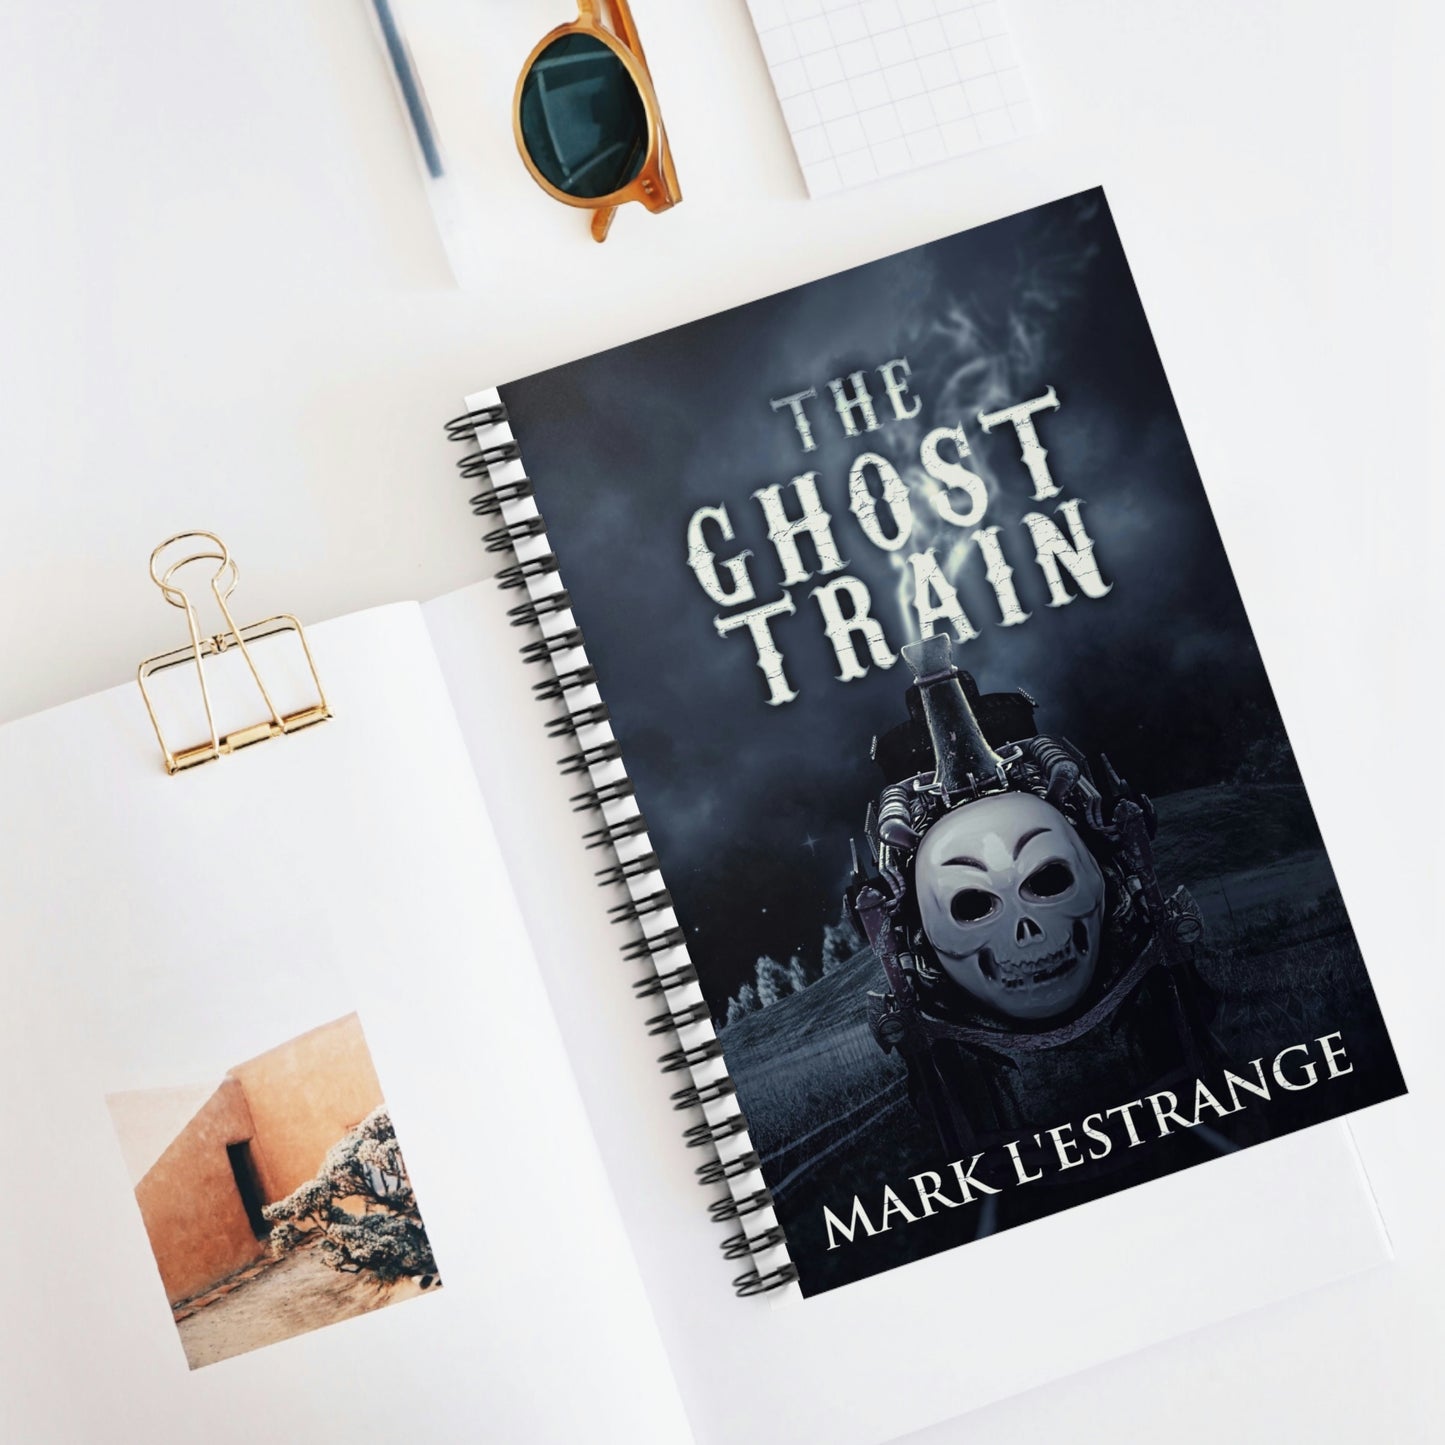 The Ghost Train - Spiral Notebook